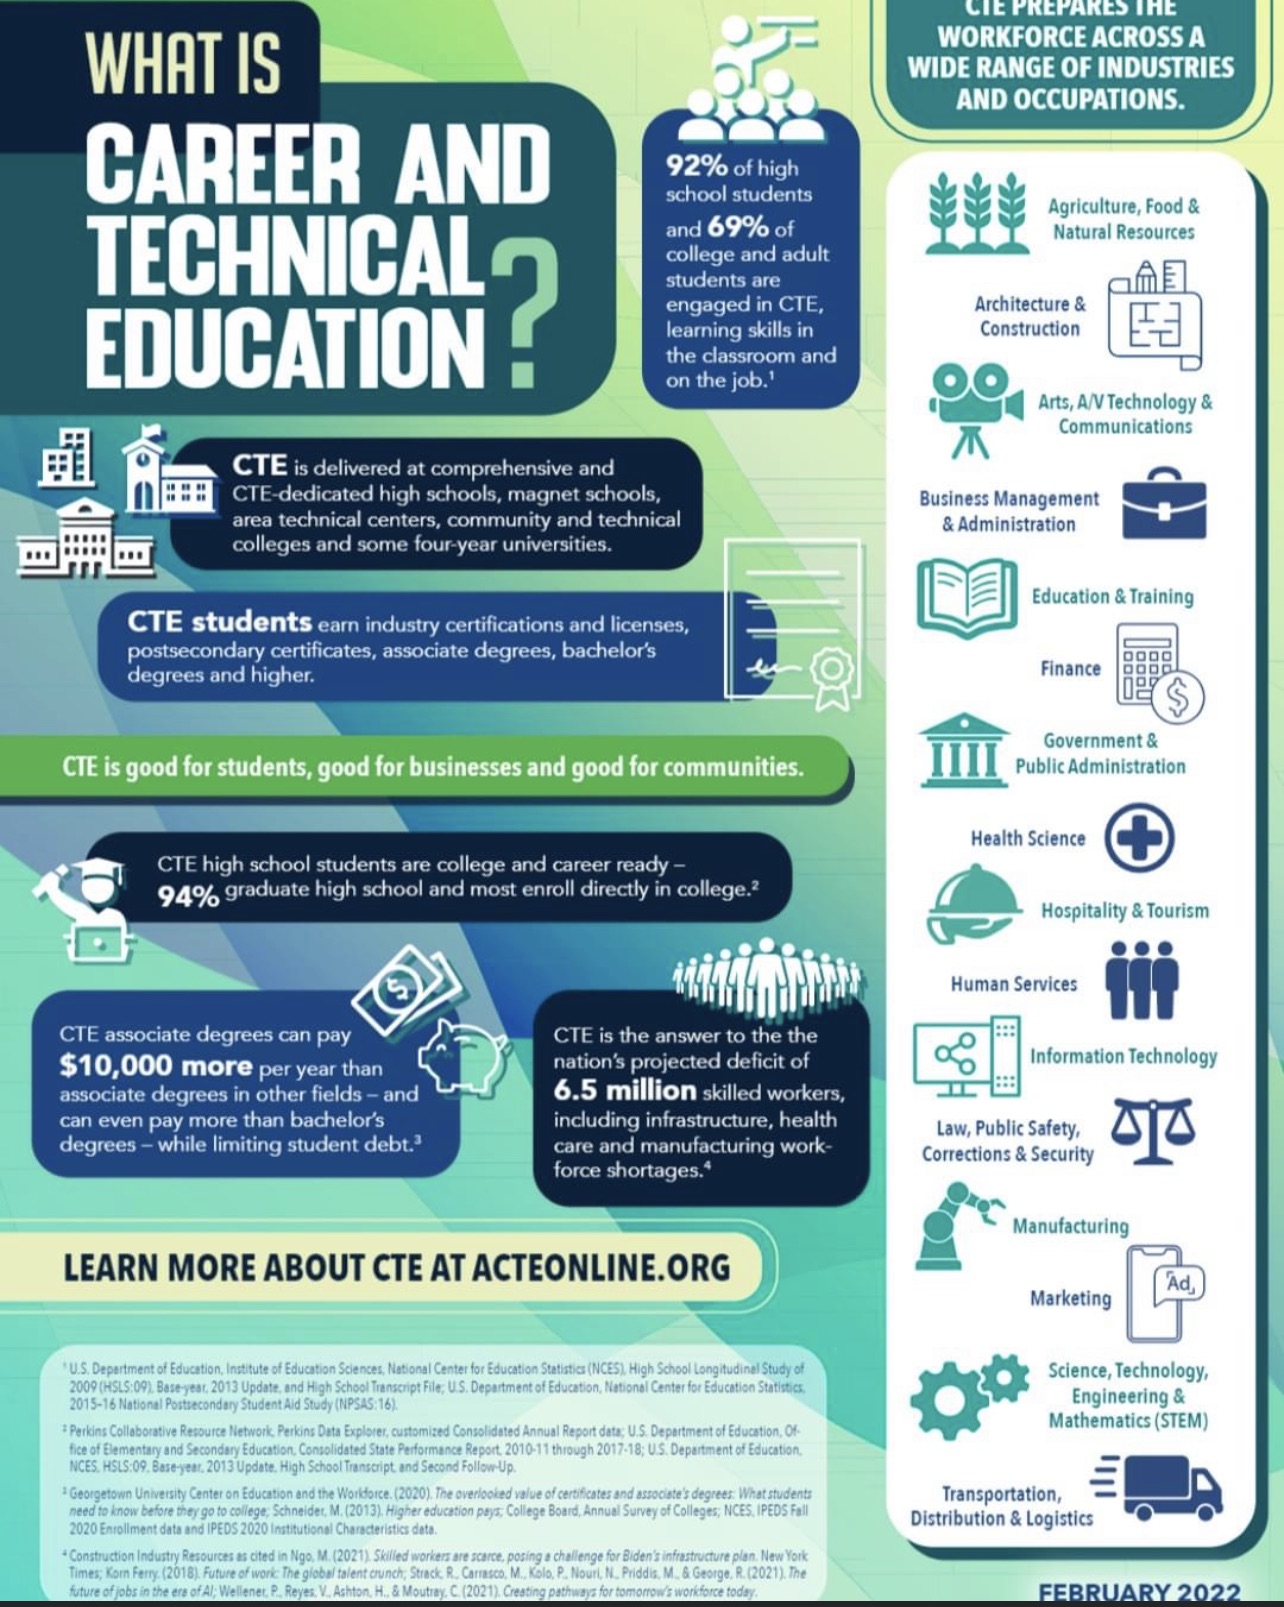 What is Career and Technical Education?